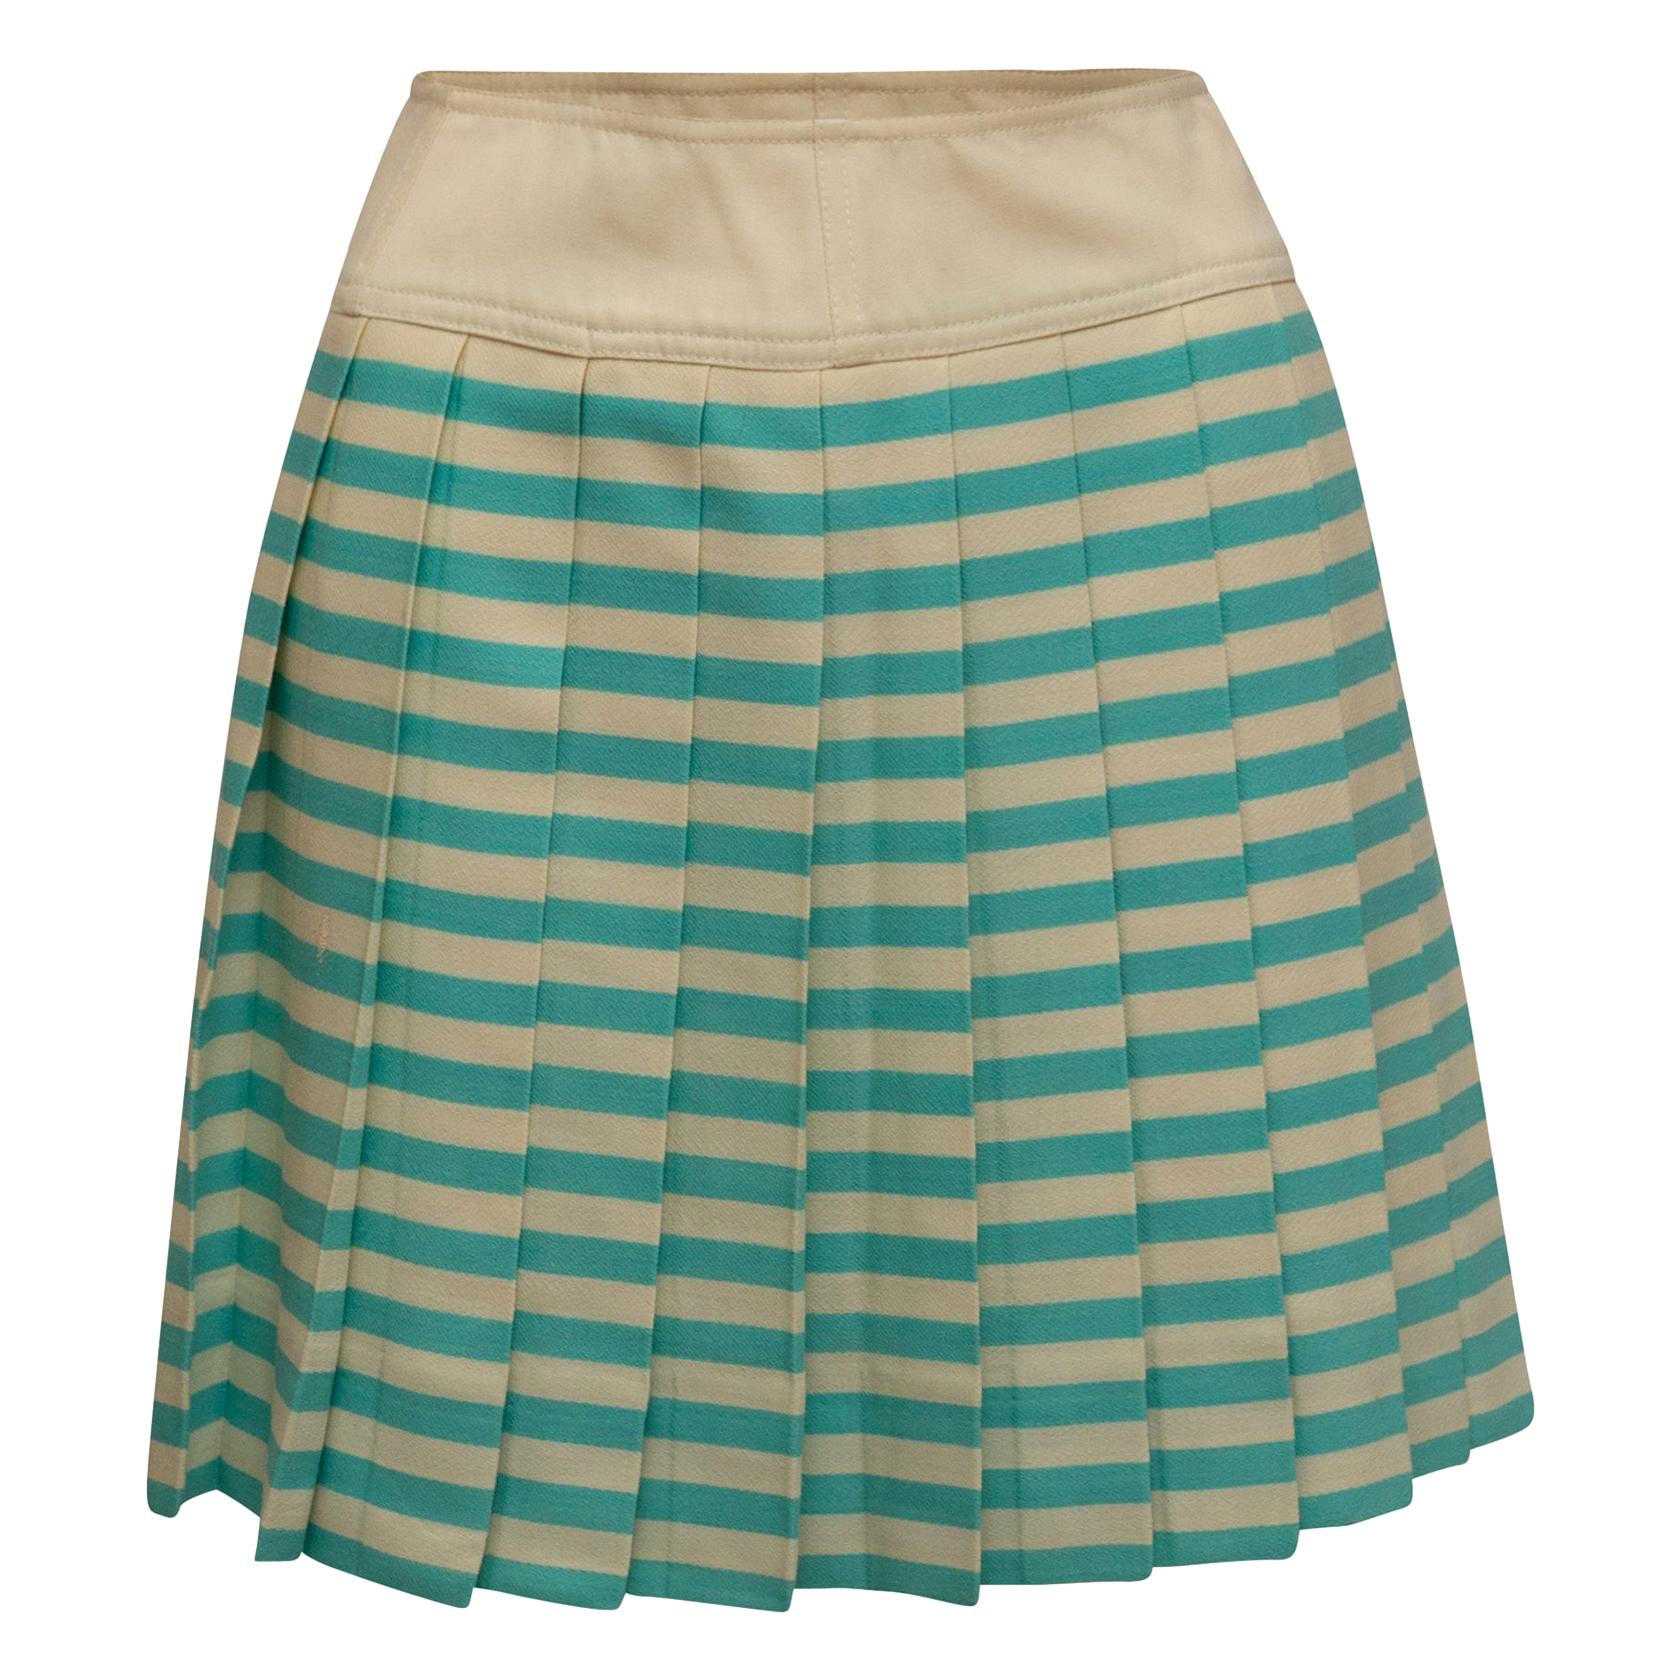 Courreges Cream & Turquoise Wool Pleated Skirt